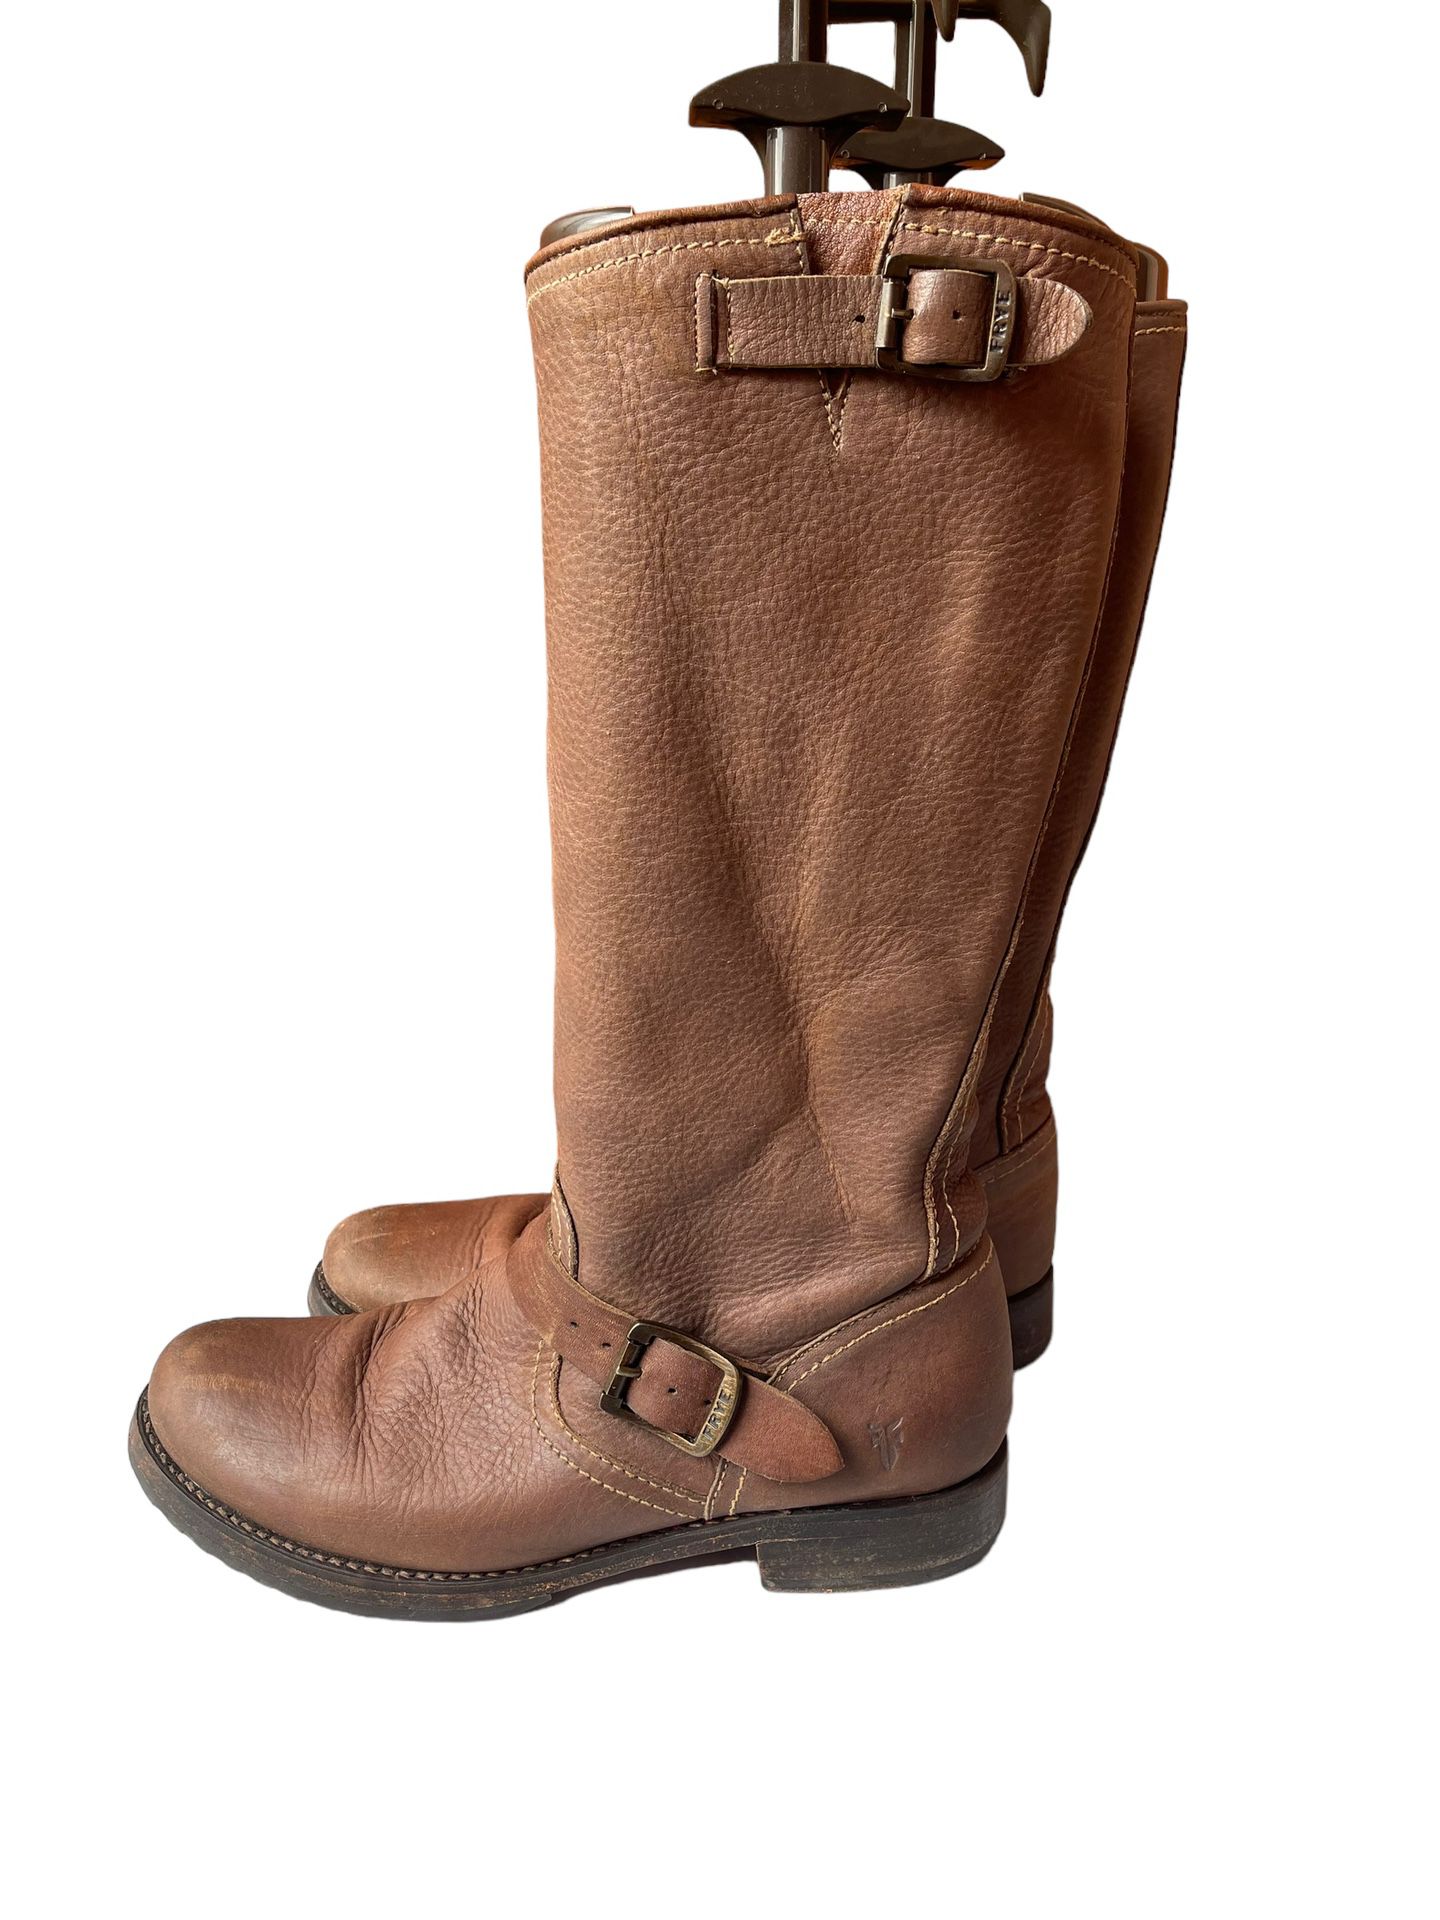 FRYE VERONICA SLOUCH BOOT SIZE:10